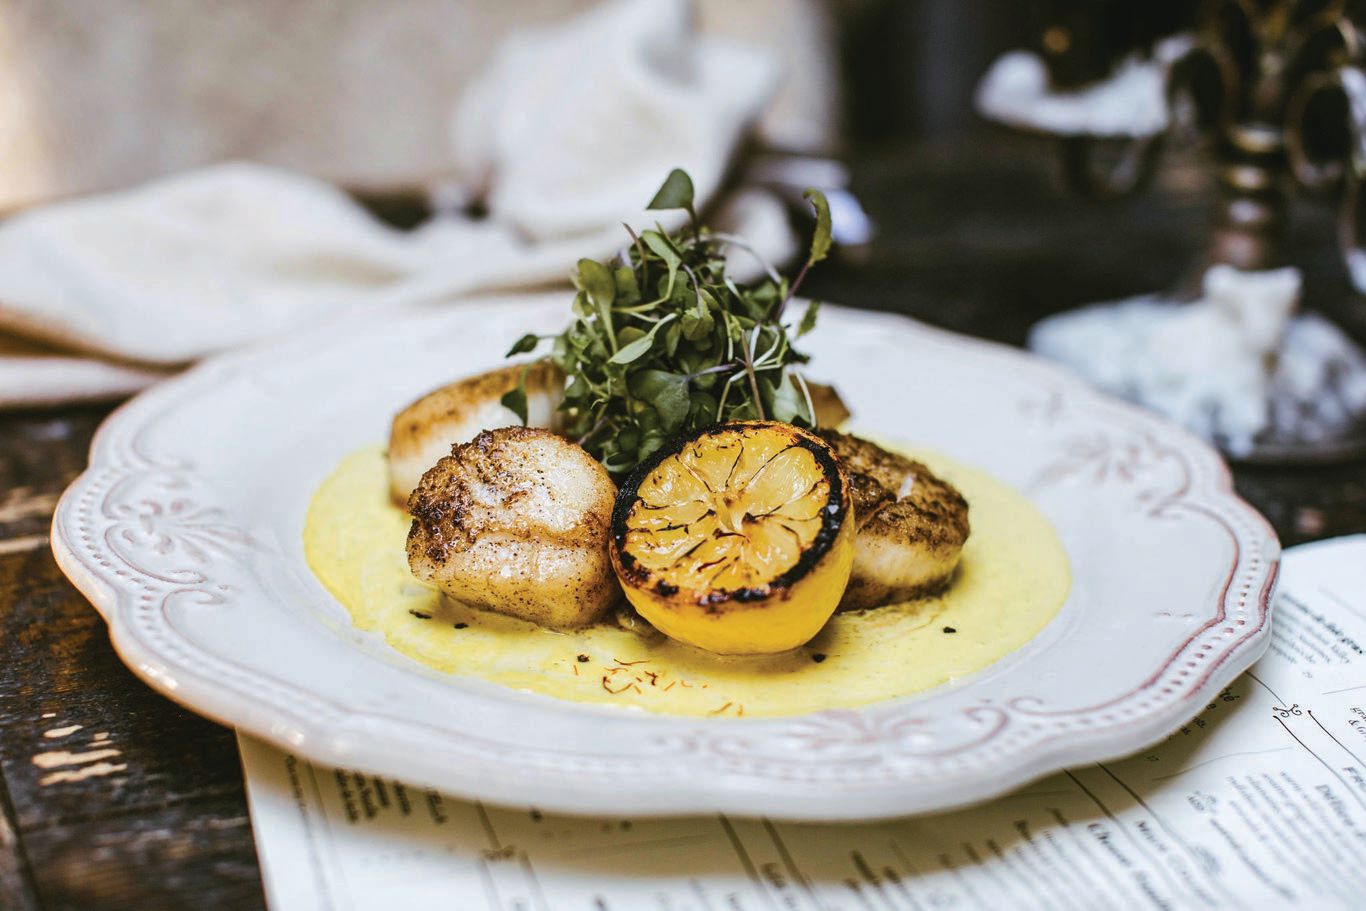 Sea scallops, with saffron lemon-butter sauce, basil and microgreens PHOTO BY AHRLING PHOTOGRAPHY